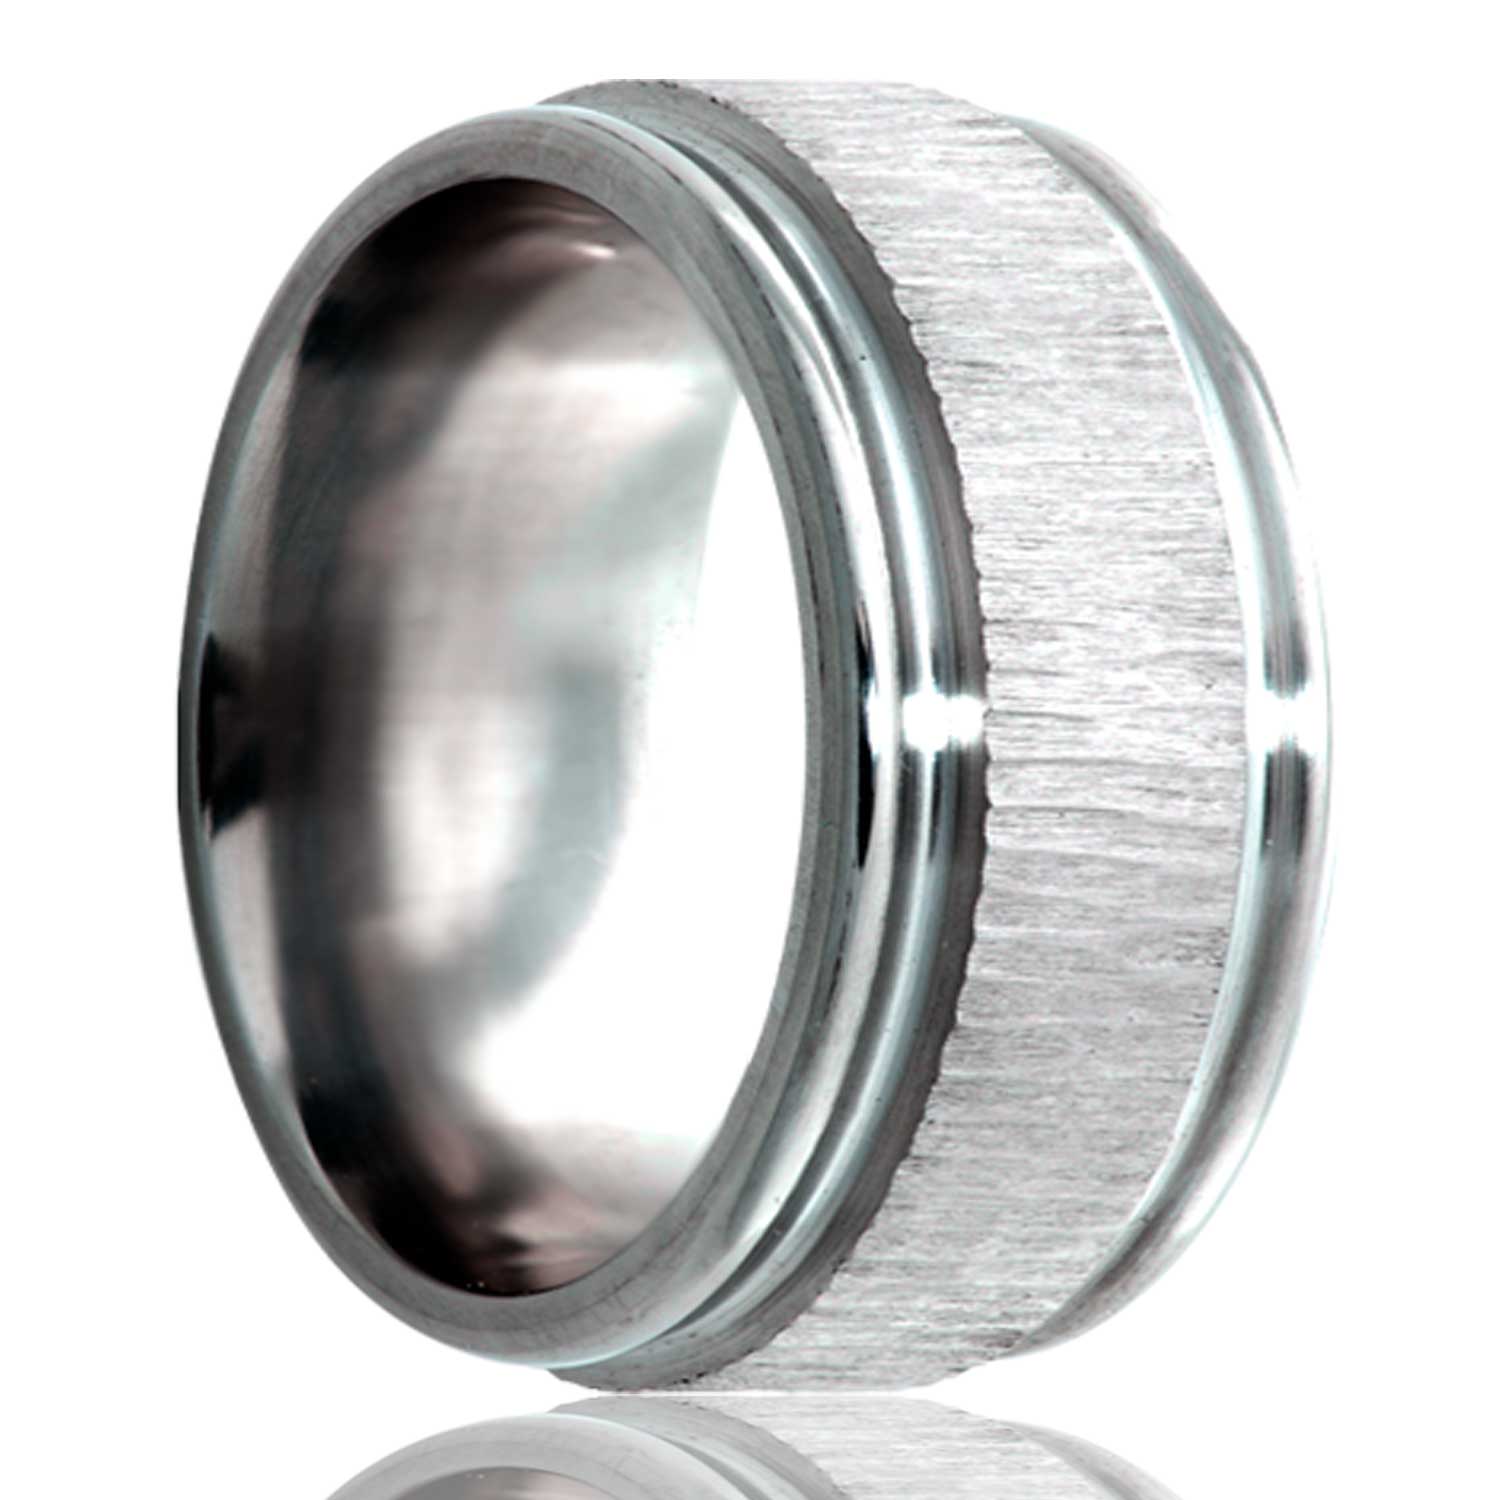 A treebark grooved titanium wedding band with stepped edges displayed on a neutral white background.